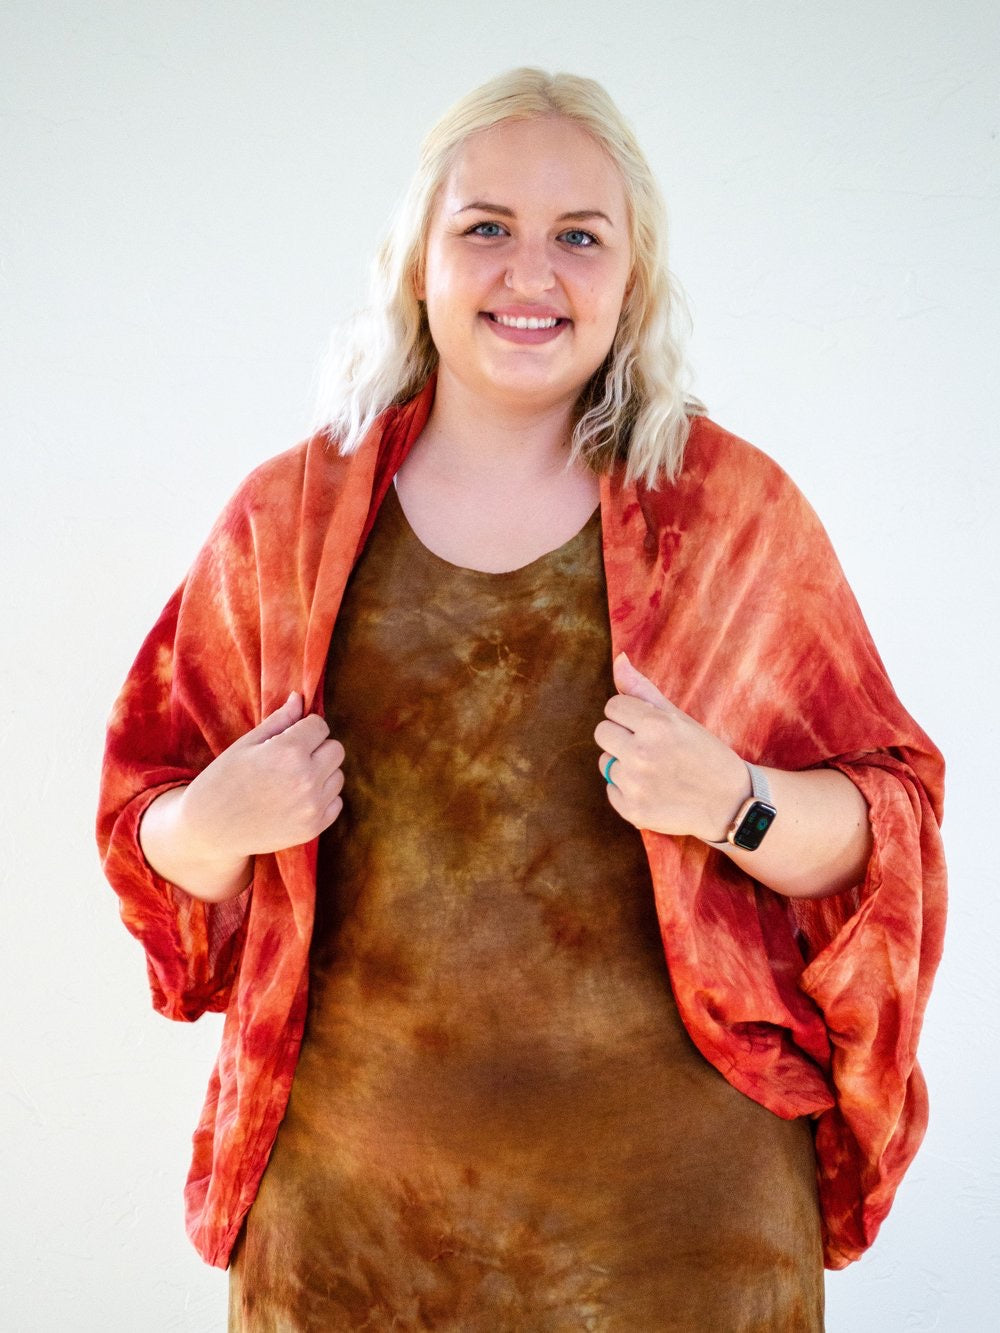 Hand-Dyed Everyday Dress in Smith Rock Colors by 1 Life - Tie Dye Dress for Camping, Shopping, and More